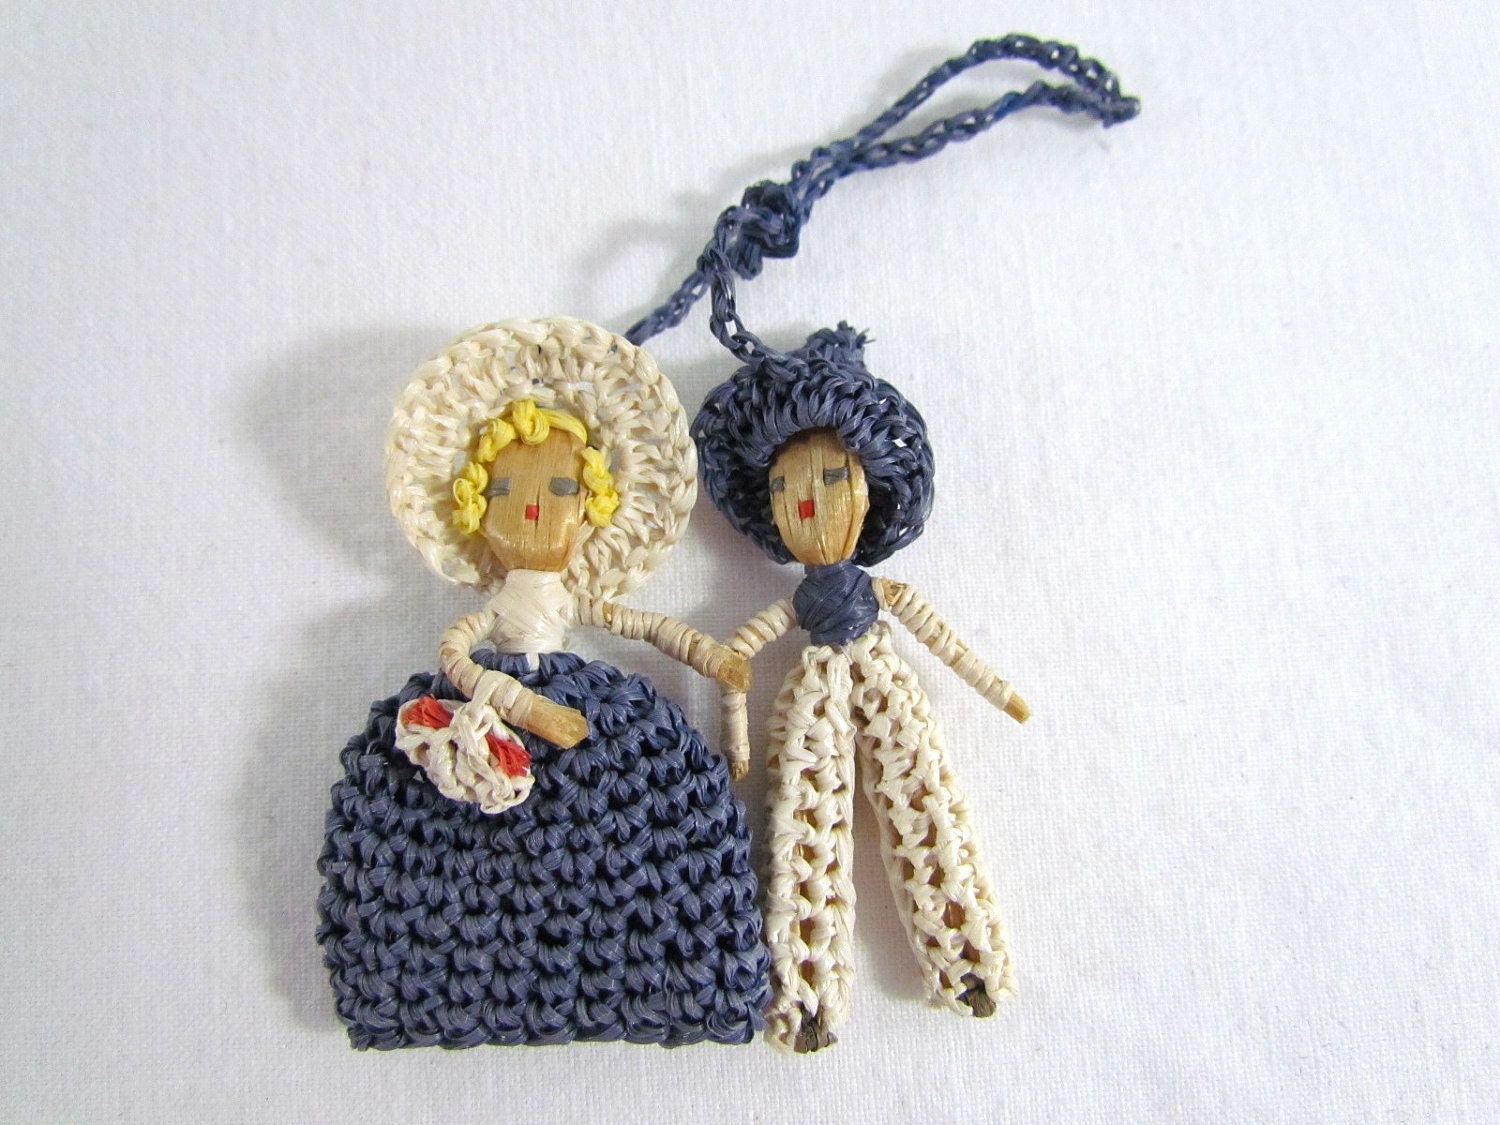 Miniature Doll Boy and Girl Crocheted So Tiny and Cute - VintagePolkaDotcom